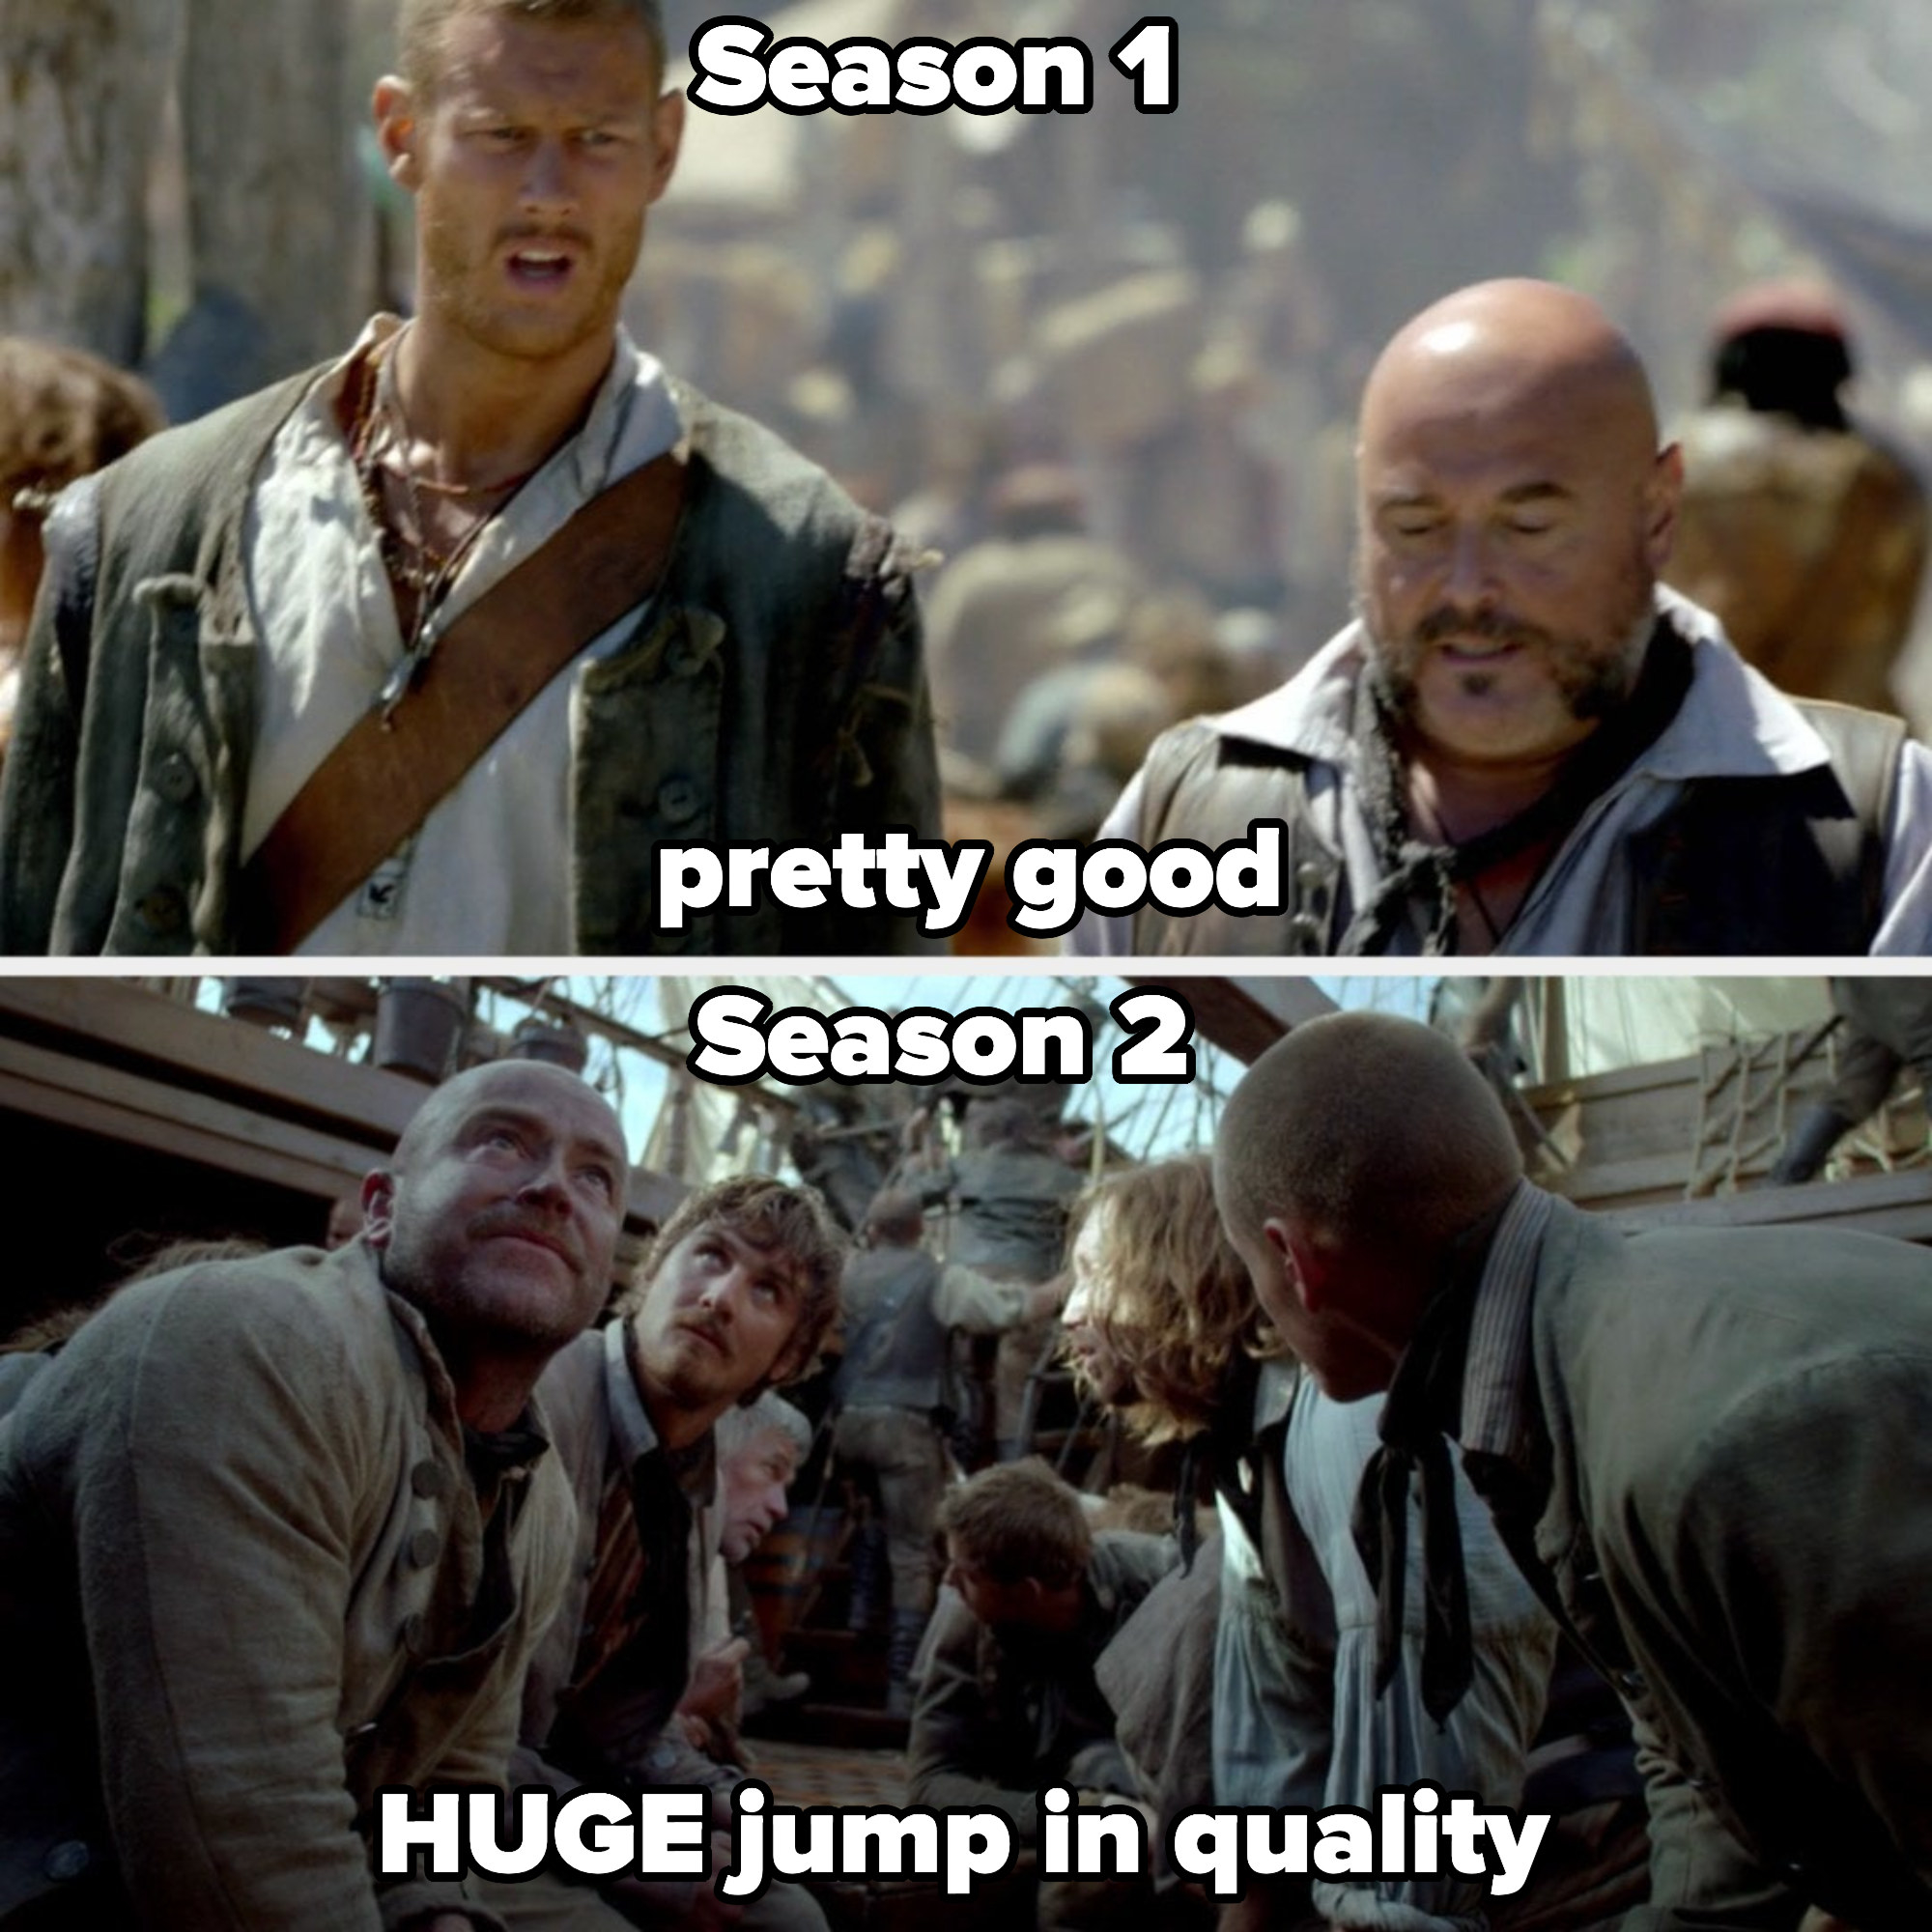 season 1 labeled &quot;pretty good&quot; and season 2 labeled &quot;HUGE jump in quality&quot;